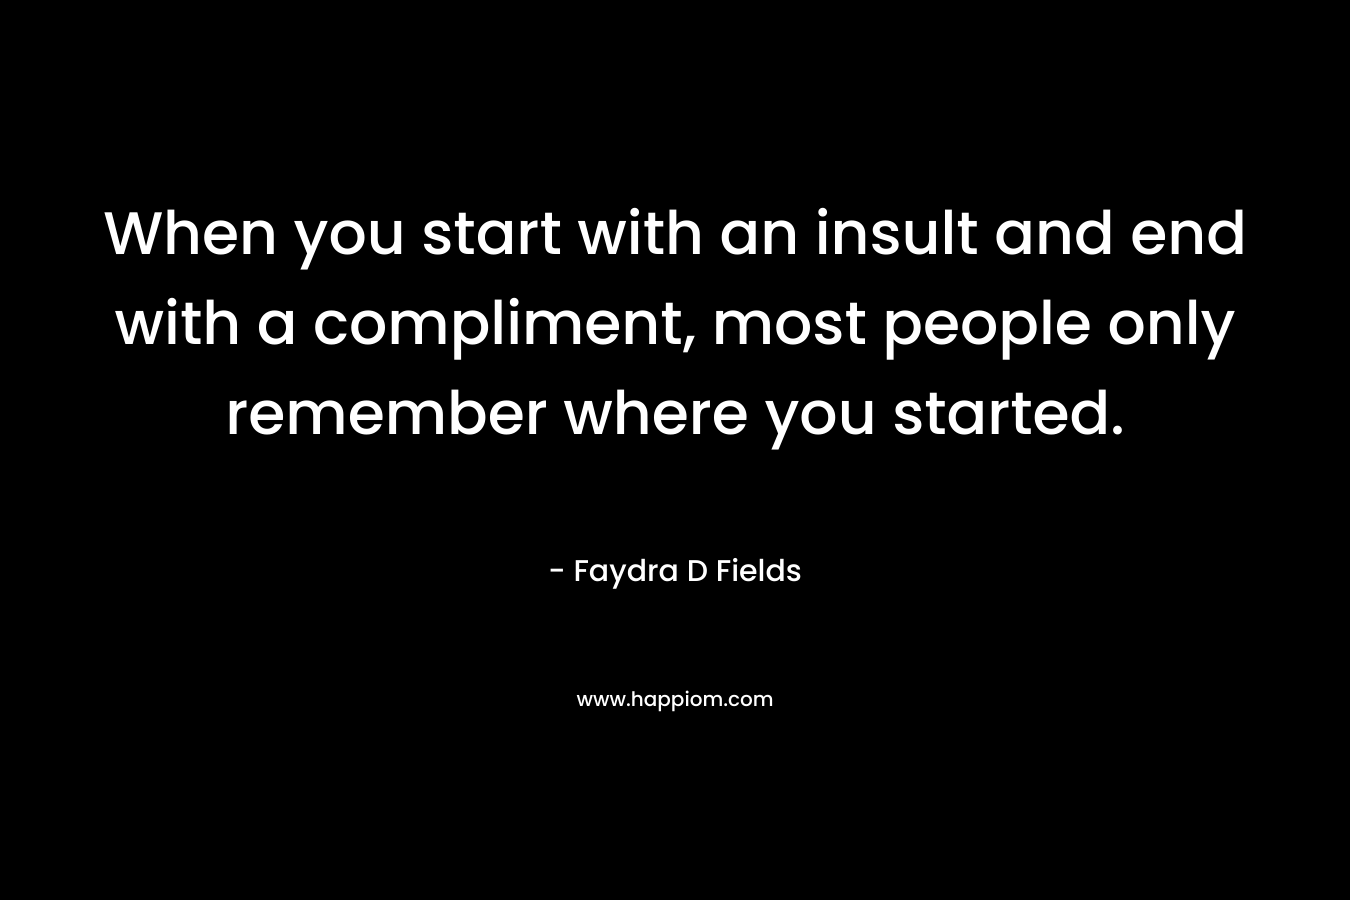 When you start with an insult and end with a compliment, most people only remember where you started. – Faydra D Fields